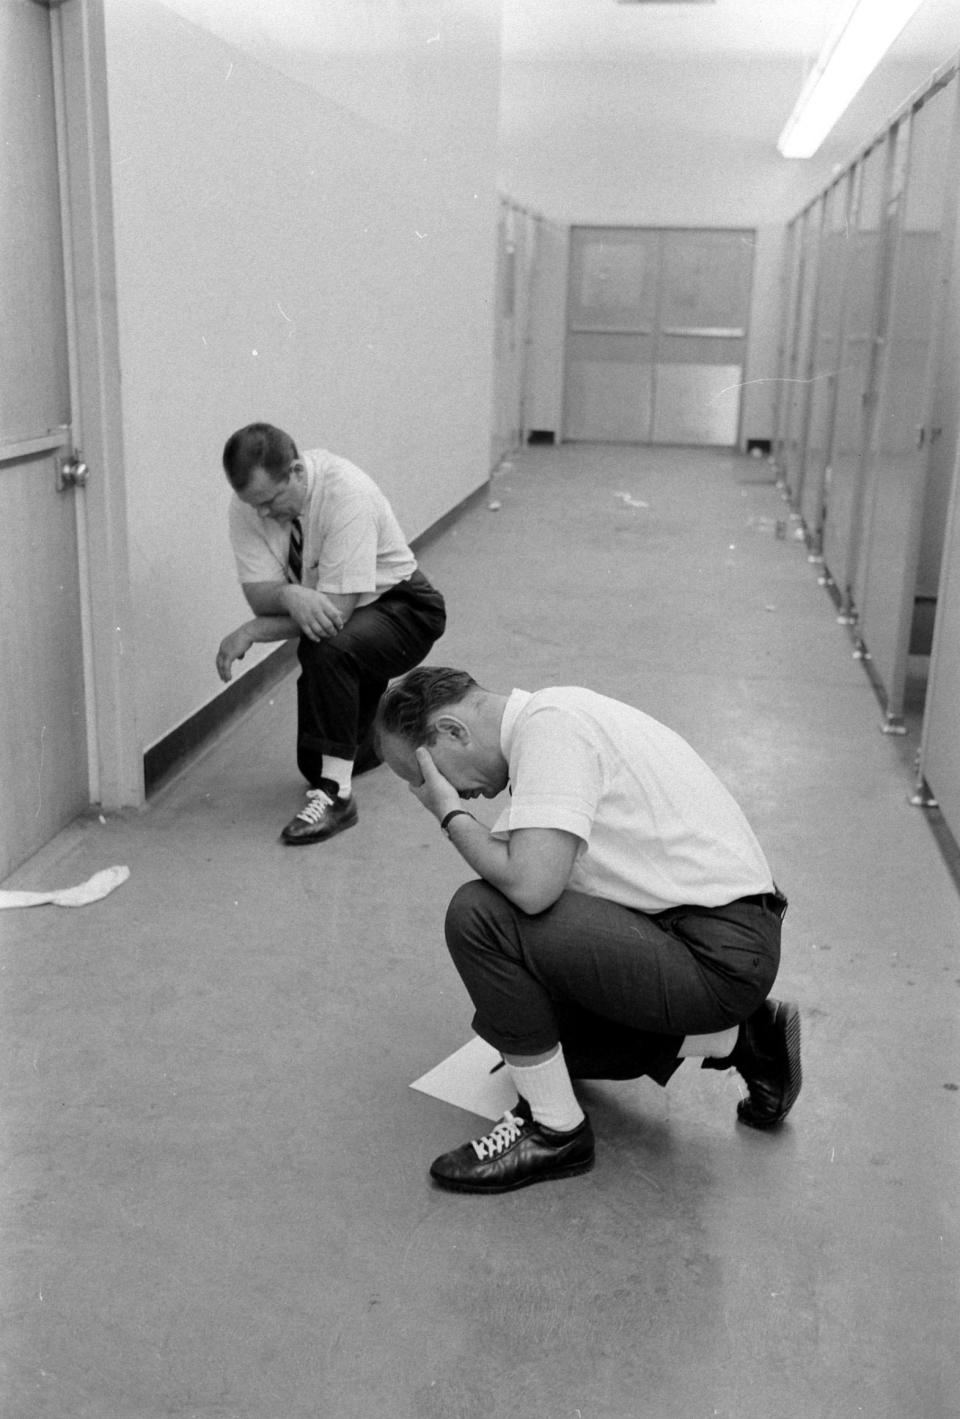 An unhappy moment behind the scenes after the Chiefs lost to the Green Bay Packers. <span class="copyright">Bill Ray—The LIFE Picture Collection/Shutterstock</span>